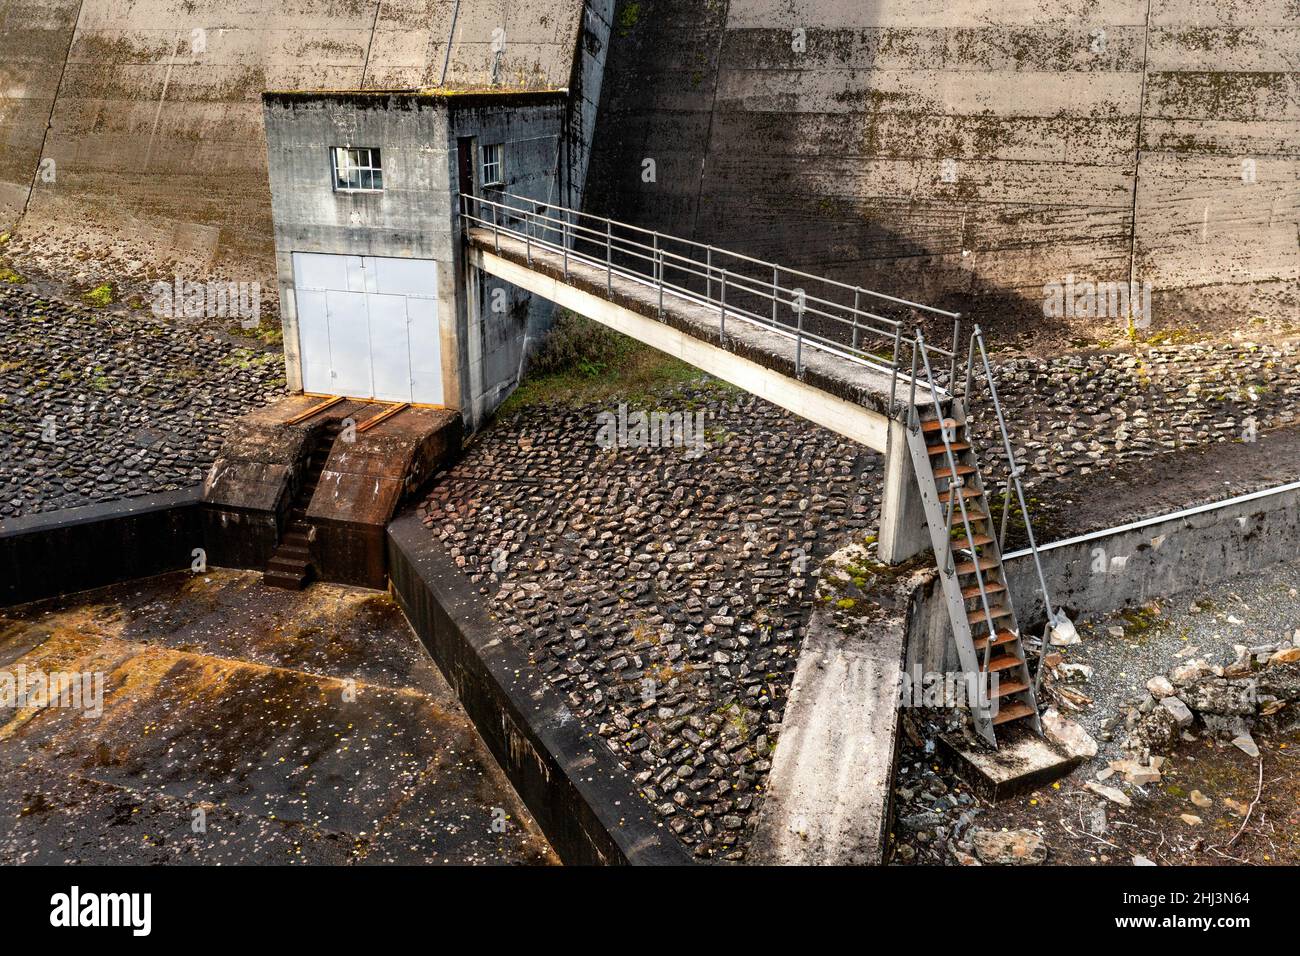 Images of the buttresses and spillway of the Errochty Hydro Electric Dam in Perthshire, Scotland.  Part of the Tummel Garry Hydro Scheme. Stock Photo